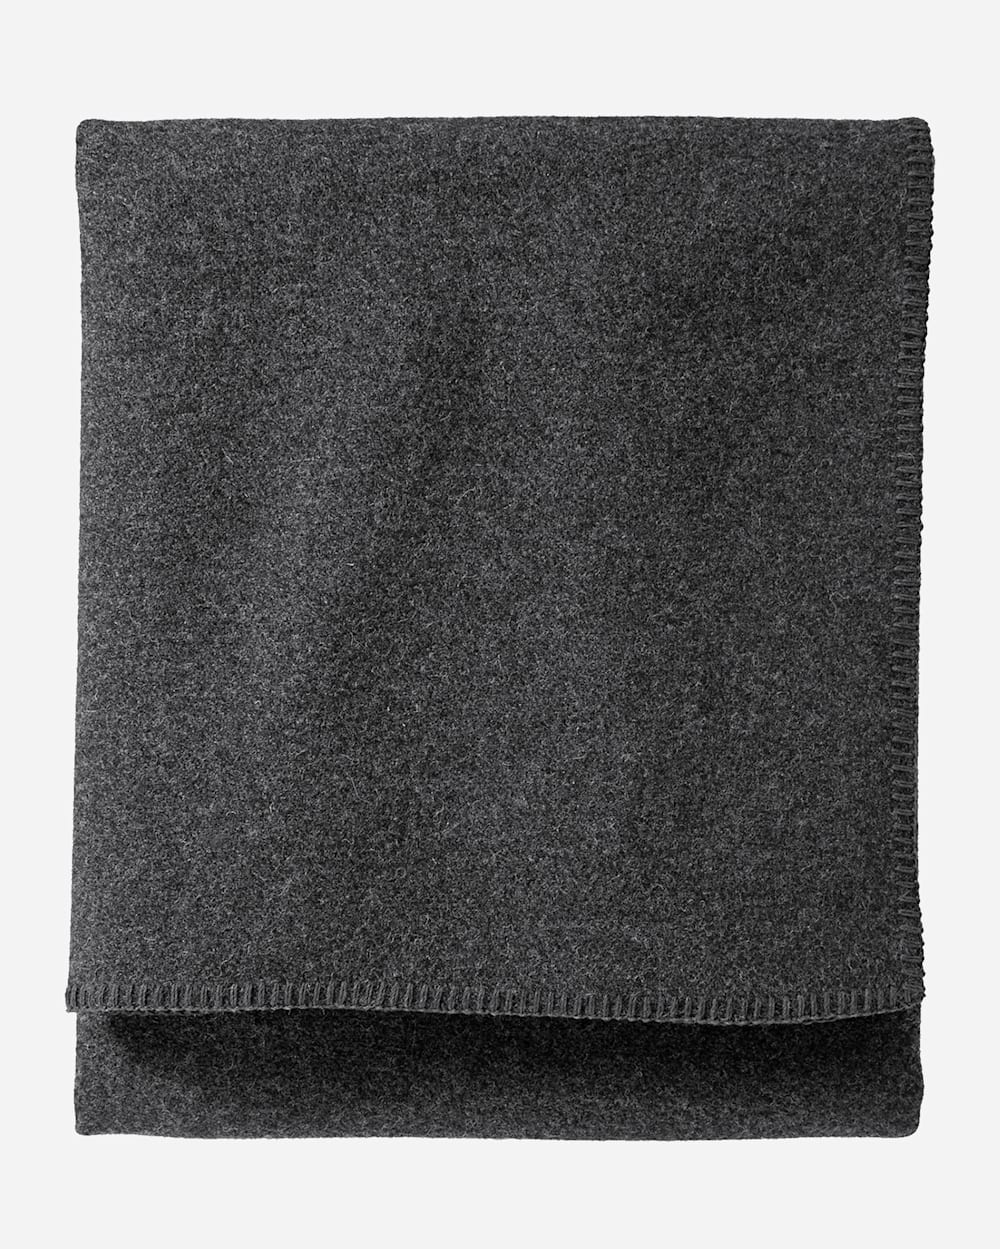 ECO-WISE WOOL SOLID BLANKET IN CHARCOAL MIX image number 1